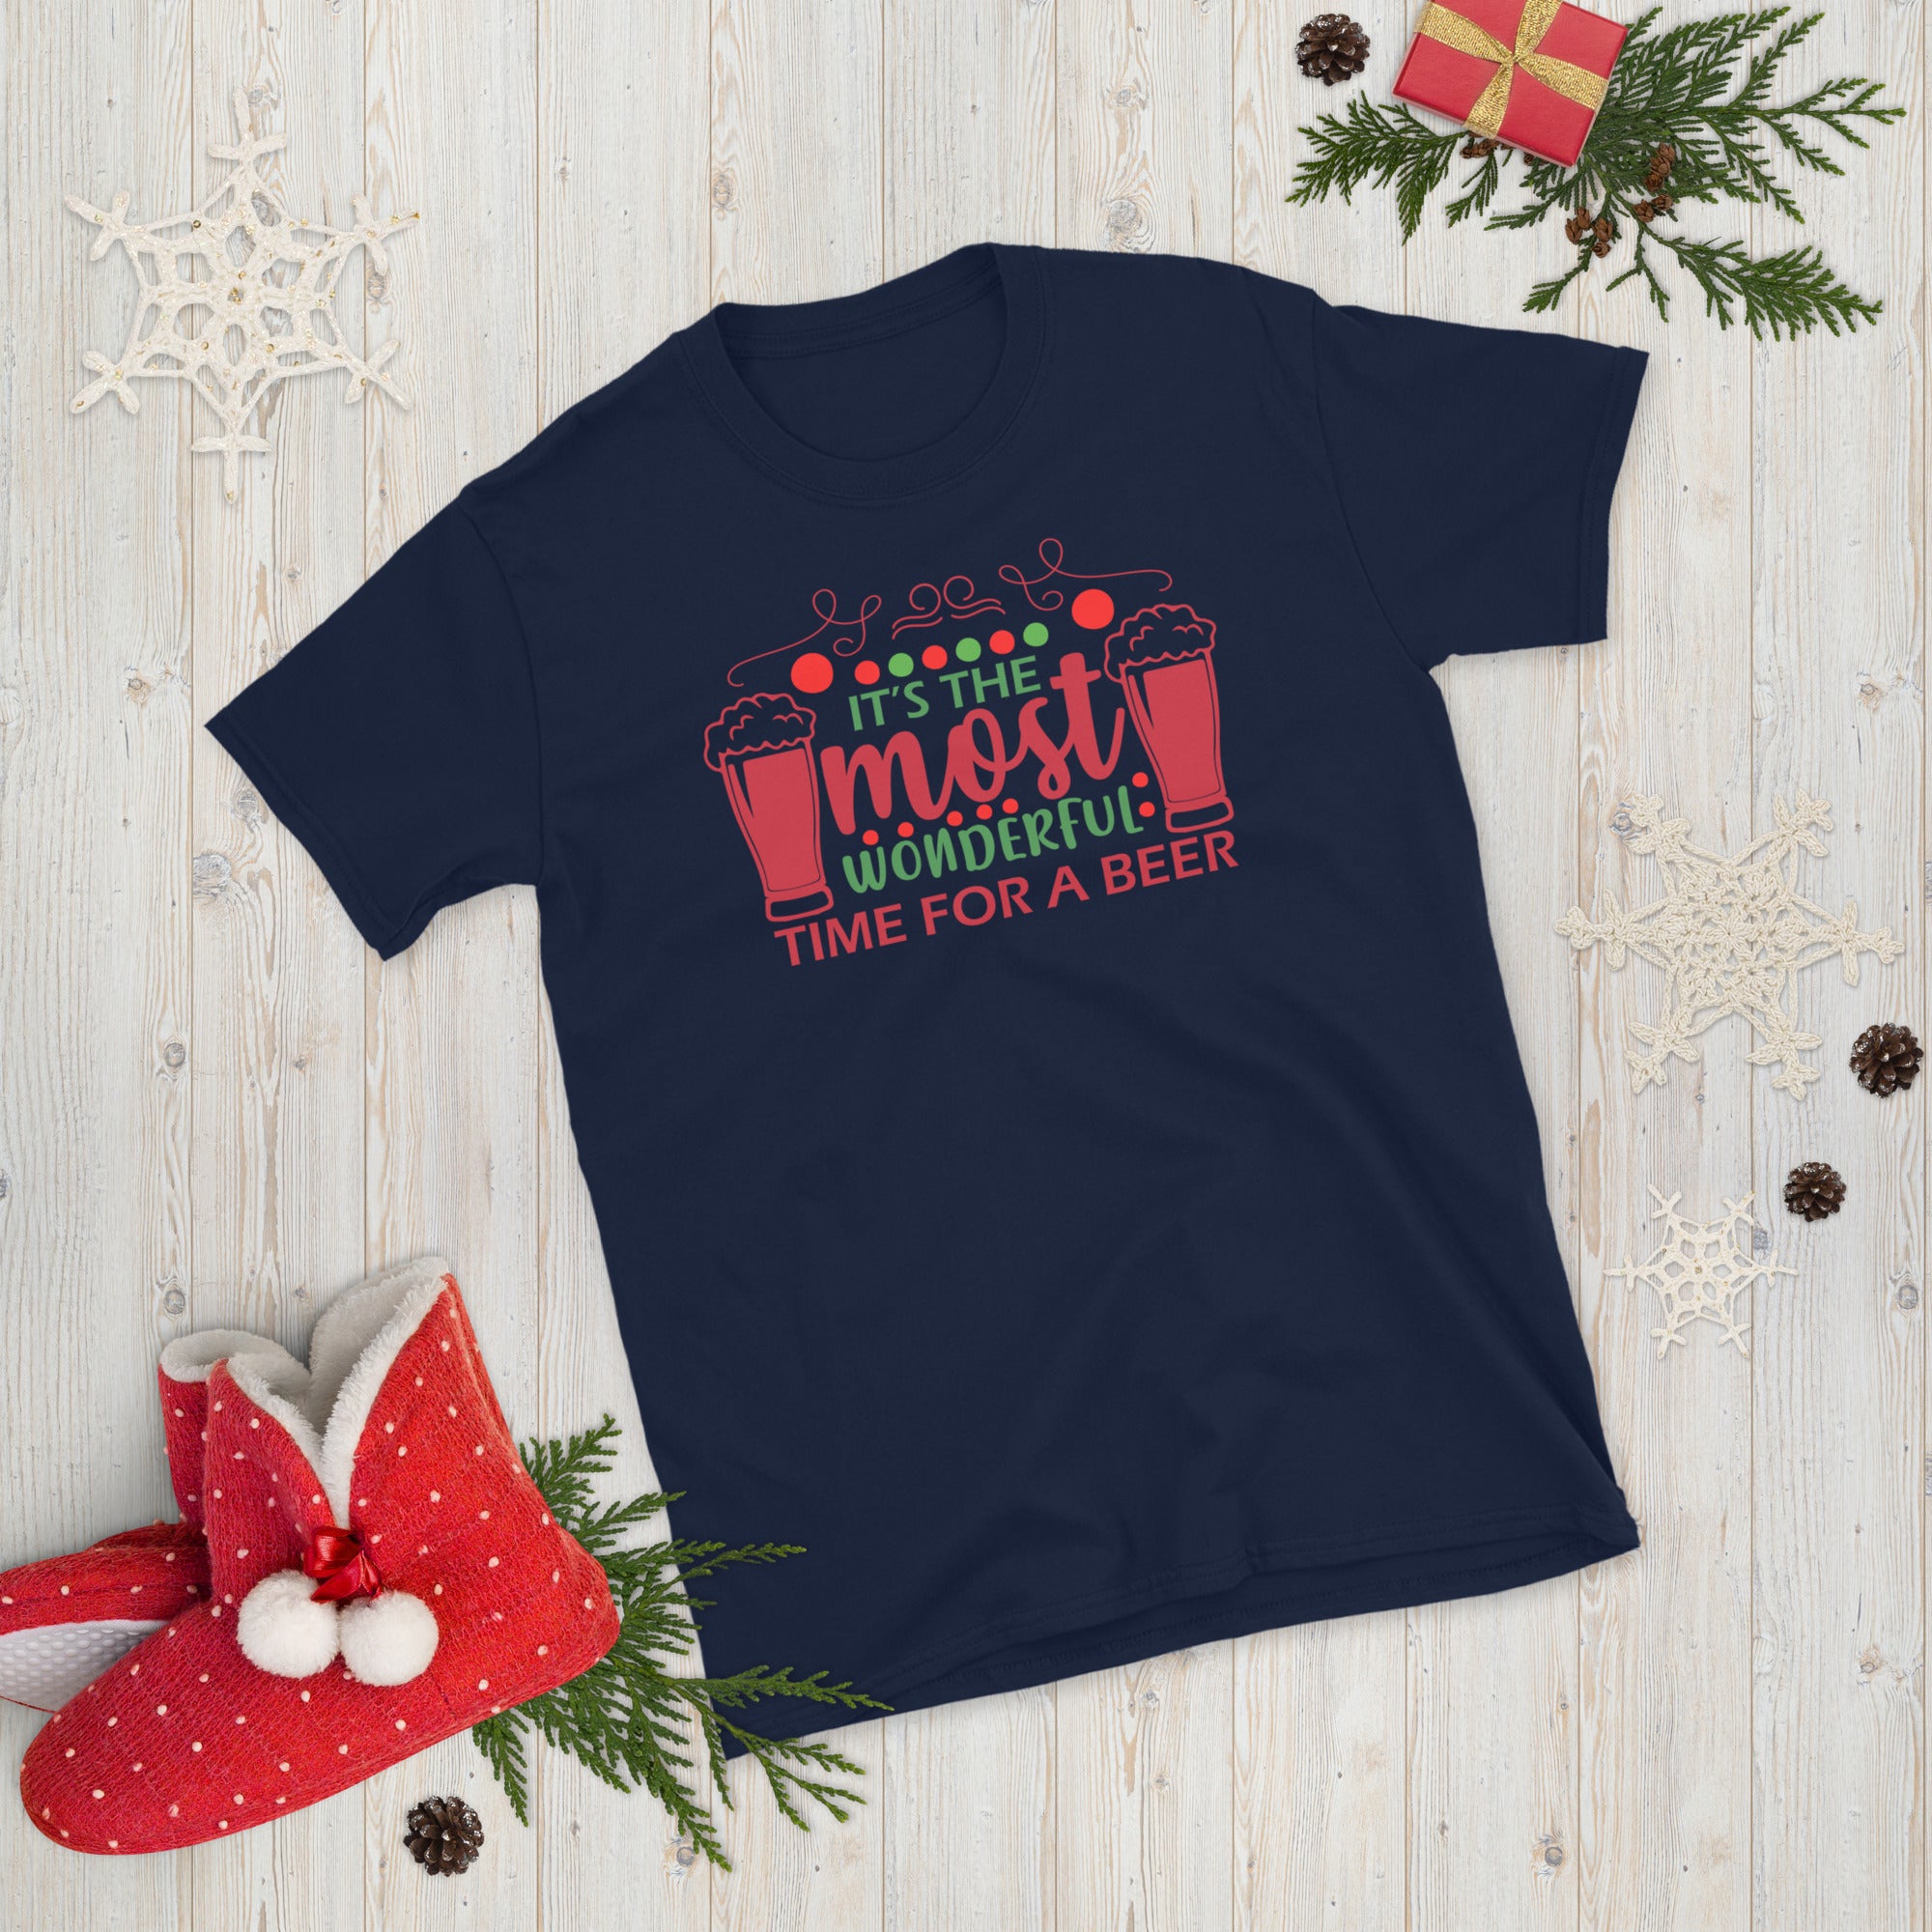 Most Wonderful Time for a Beer, Christmas Beer Shirt, Husband Christmas Gift, Husband Christmas Shirt, Beer Lover Gift, Ugly Christmas Shirt